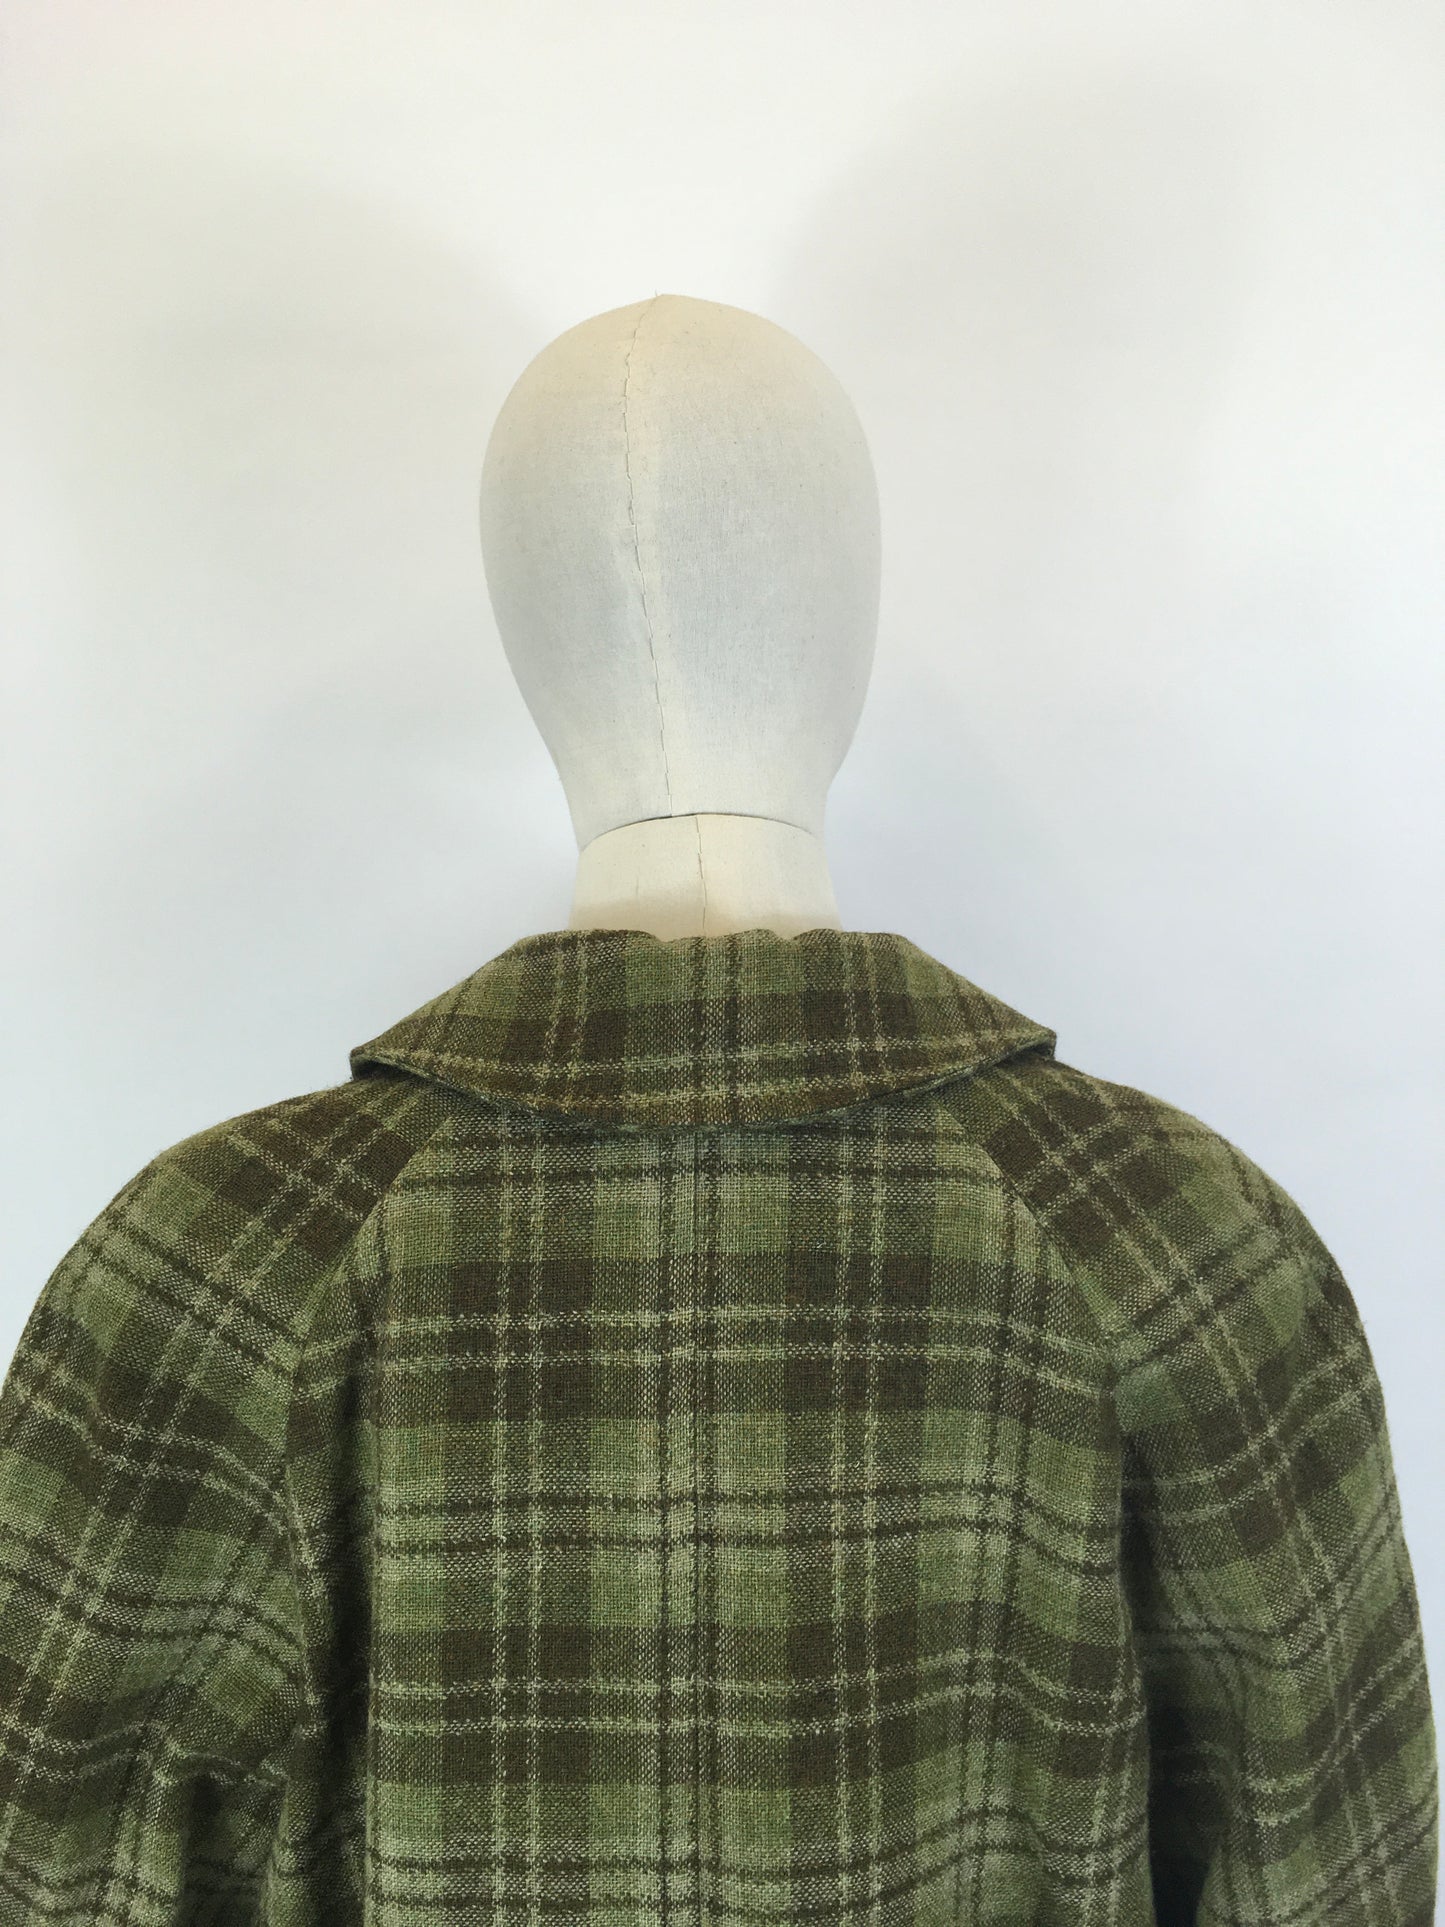 Original 1950’s FABULOUS Green Check Jacket/ Coat  - Classic 50’s Styling & Great Pockets